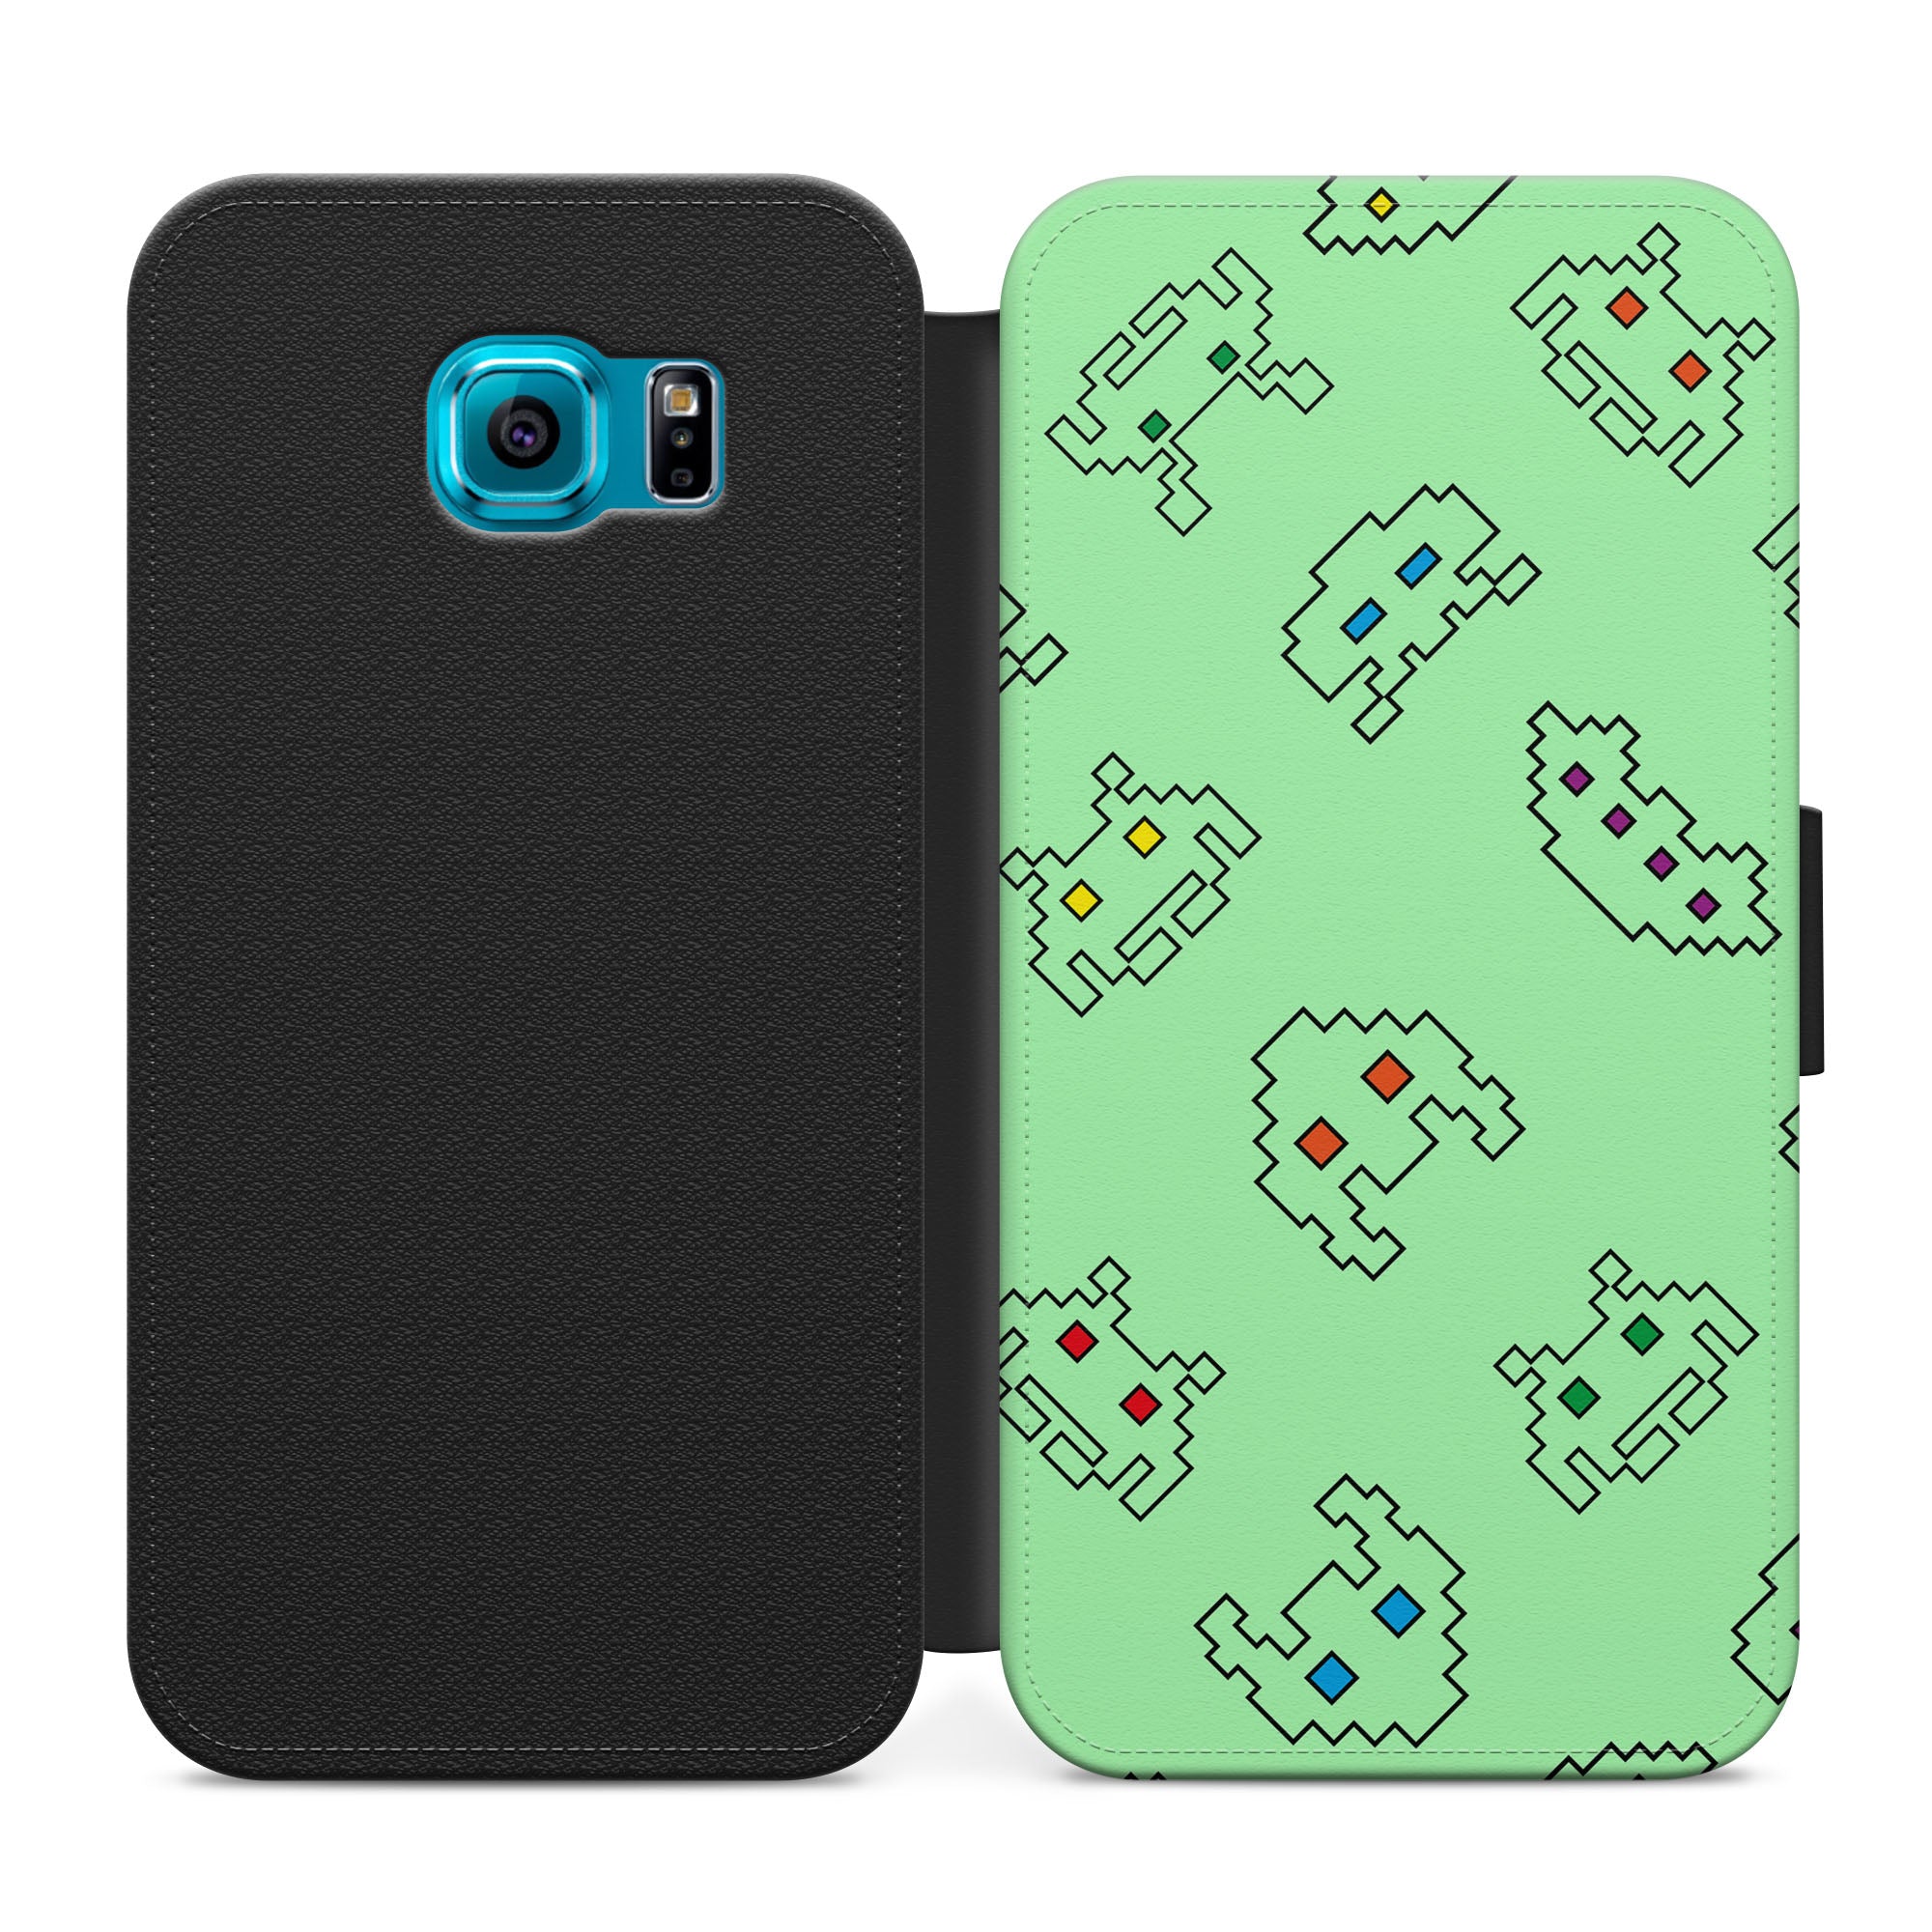 Green Space Invader Retro Gaming Faux Leather Flip Case Wallet for iPhone / Samsung